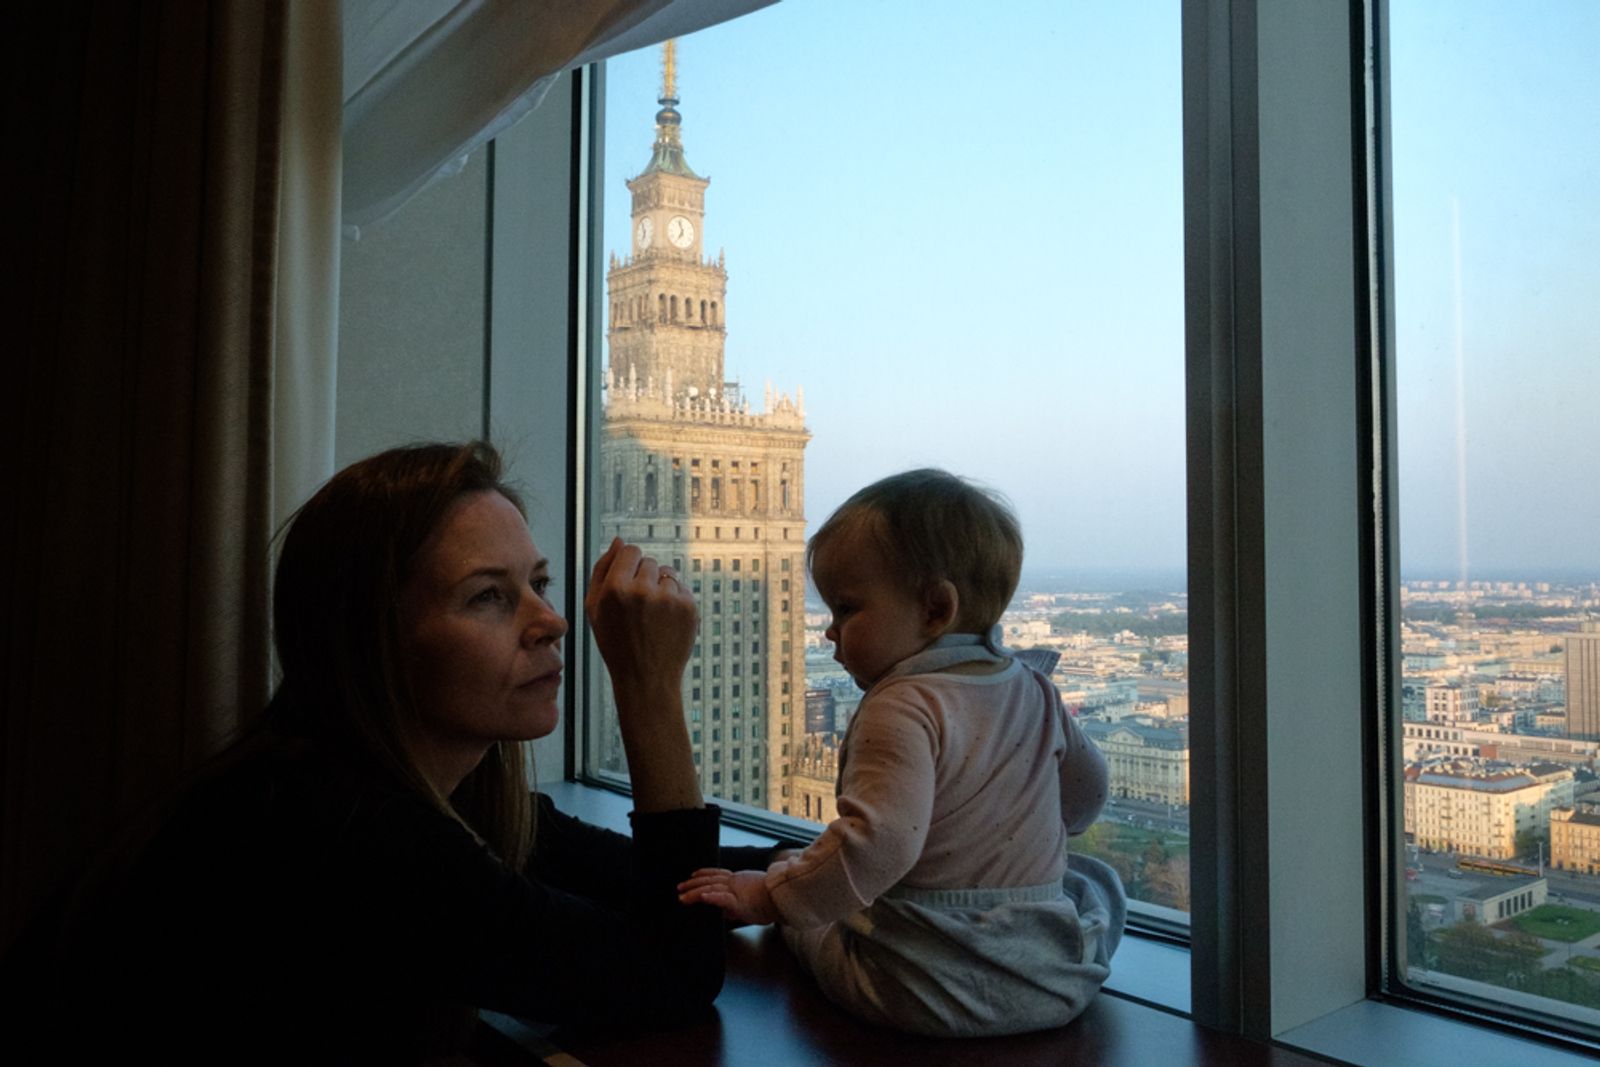 © Vincent Dupont-Blackshaw - Seated on top: A traveller overlook Warsaw from her hotel room. (Warsaw, Poland)